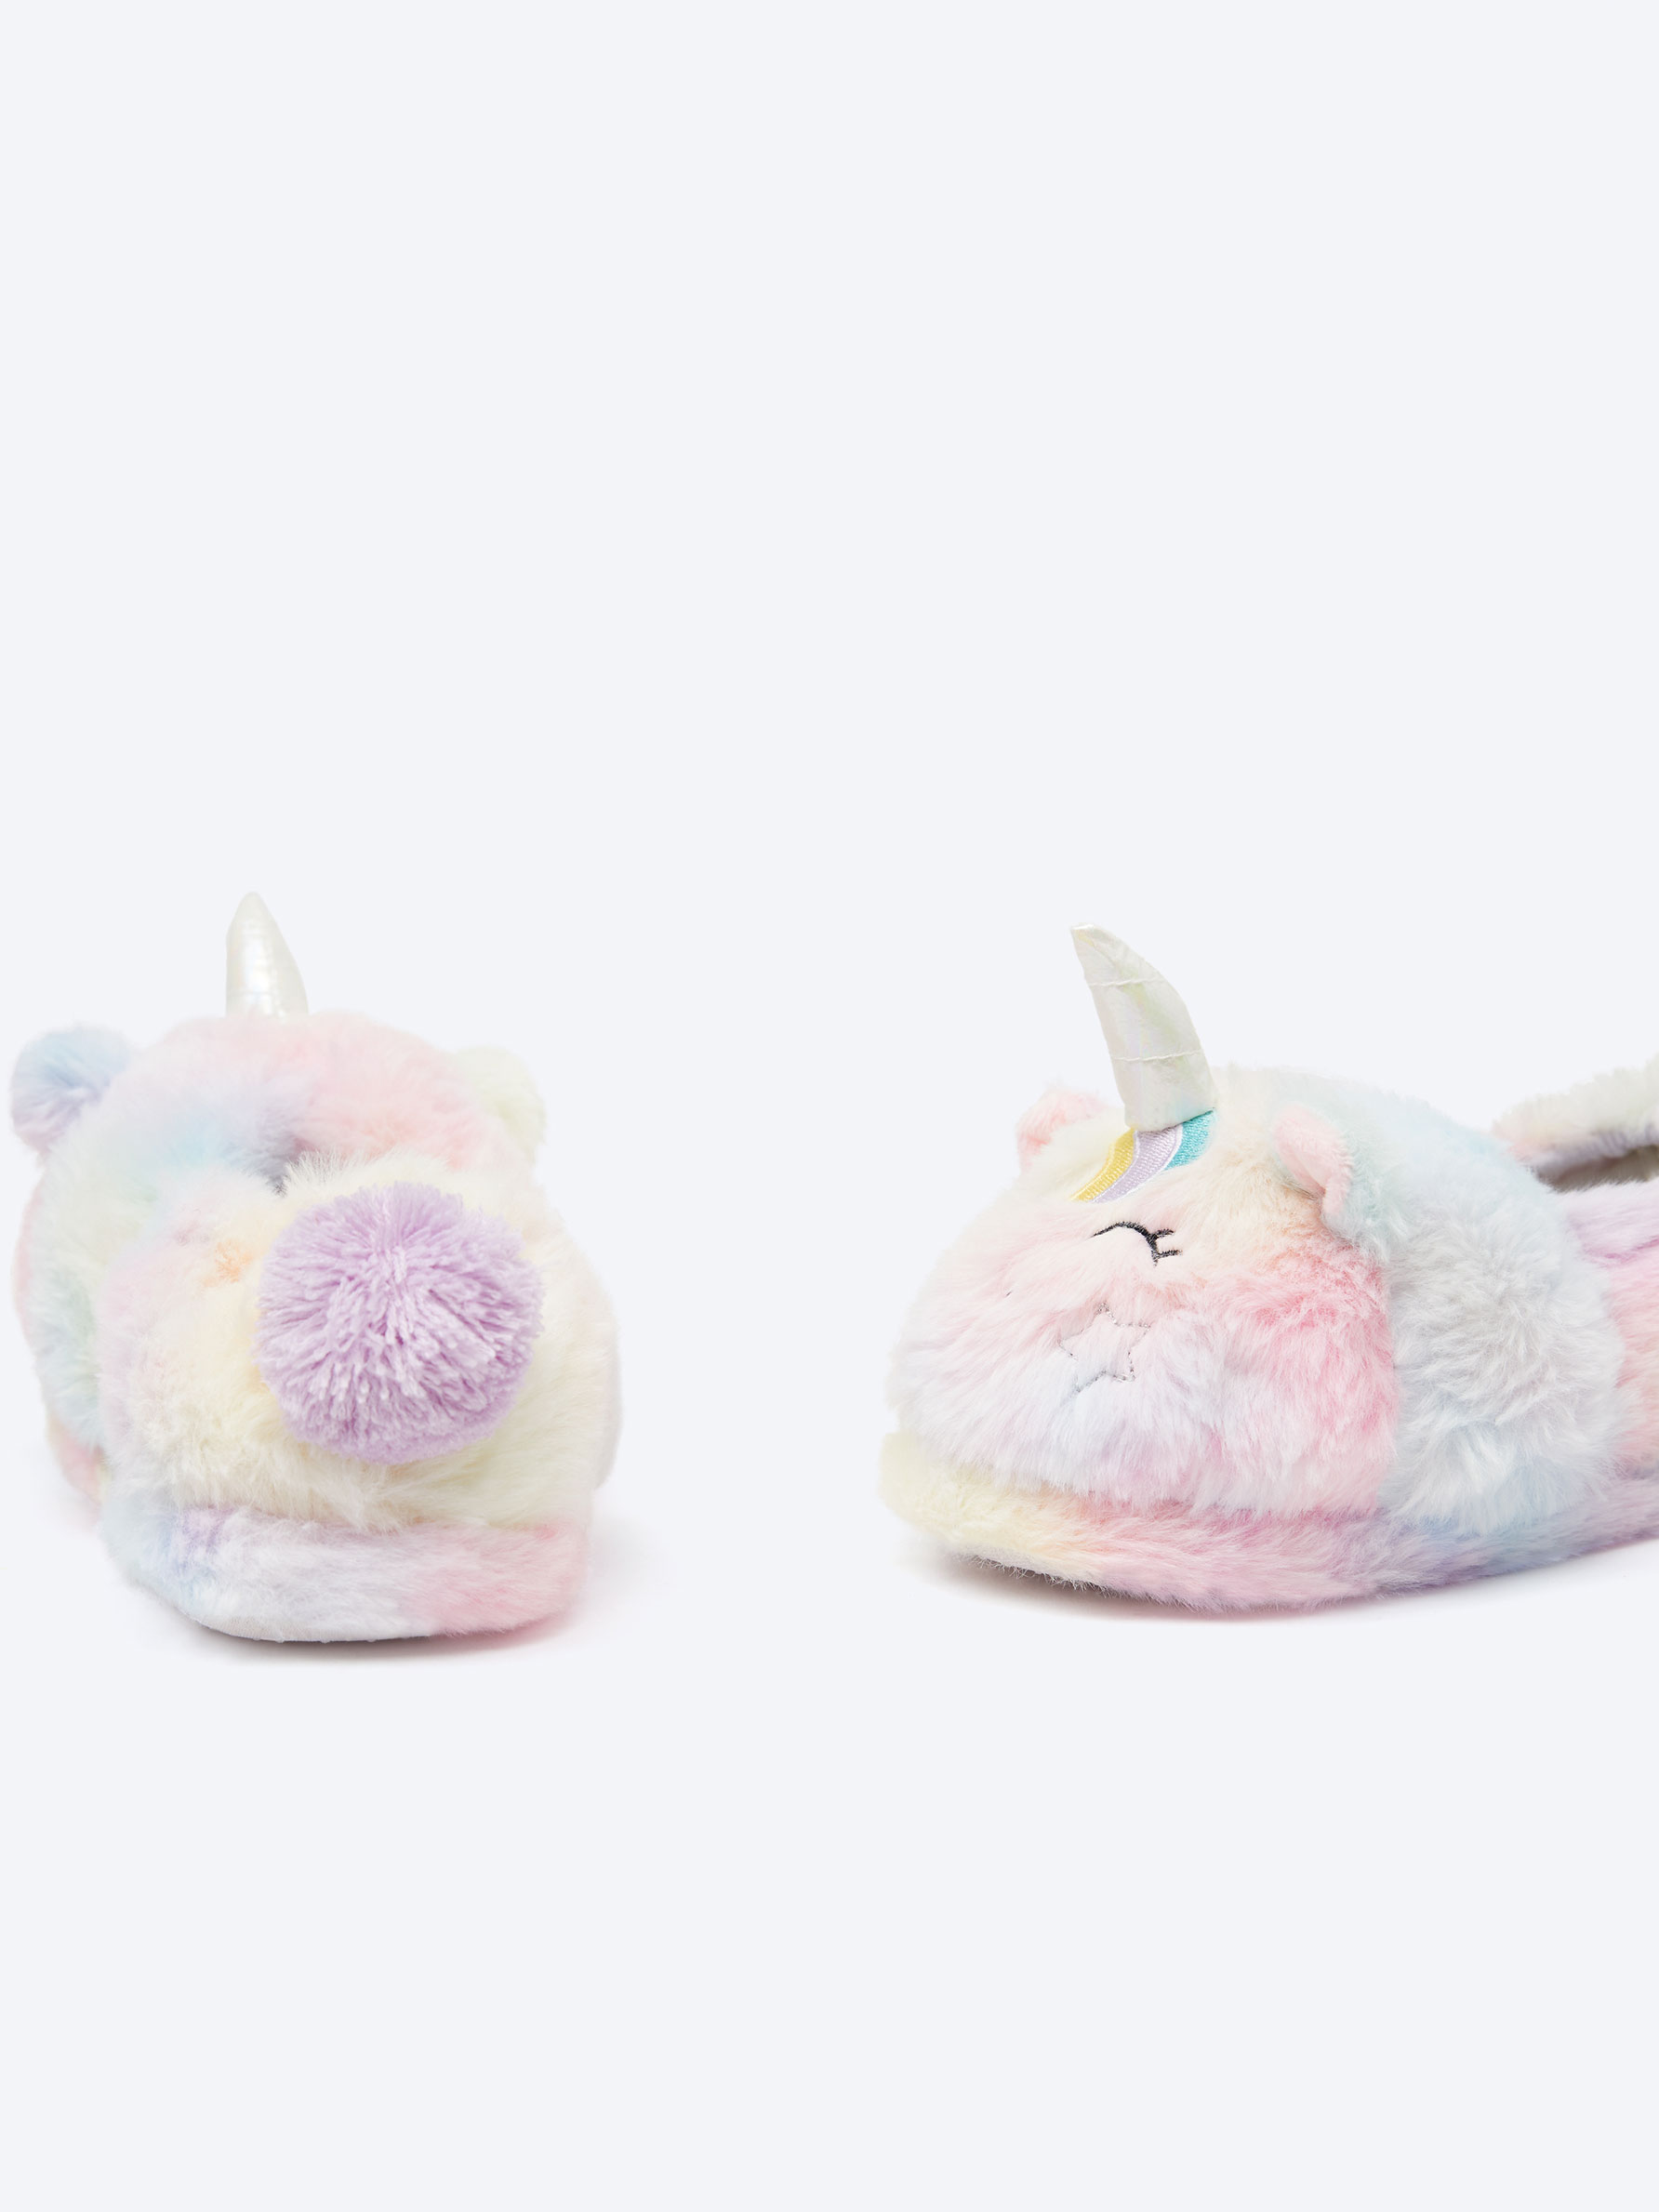 Target Slippers on Sale (+ NEW Mommy & Me Matching Collection!)